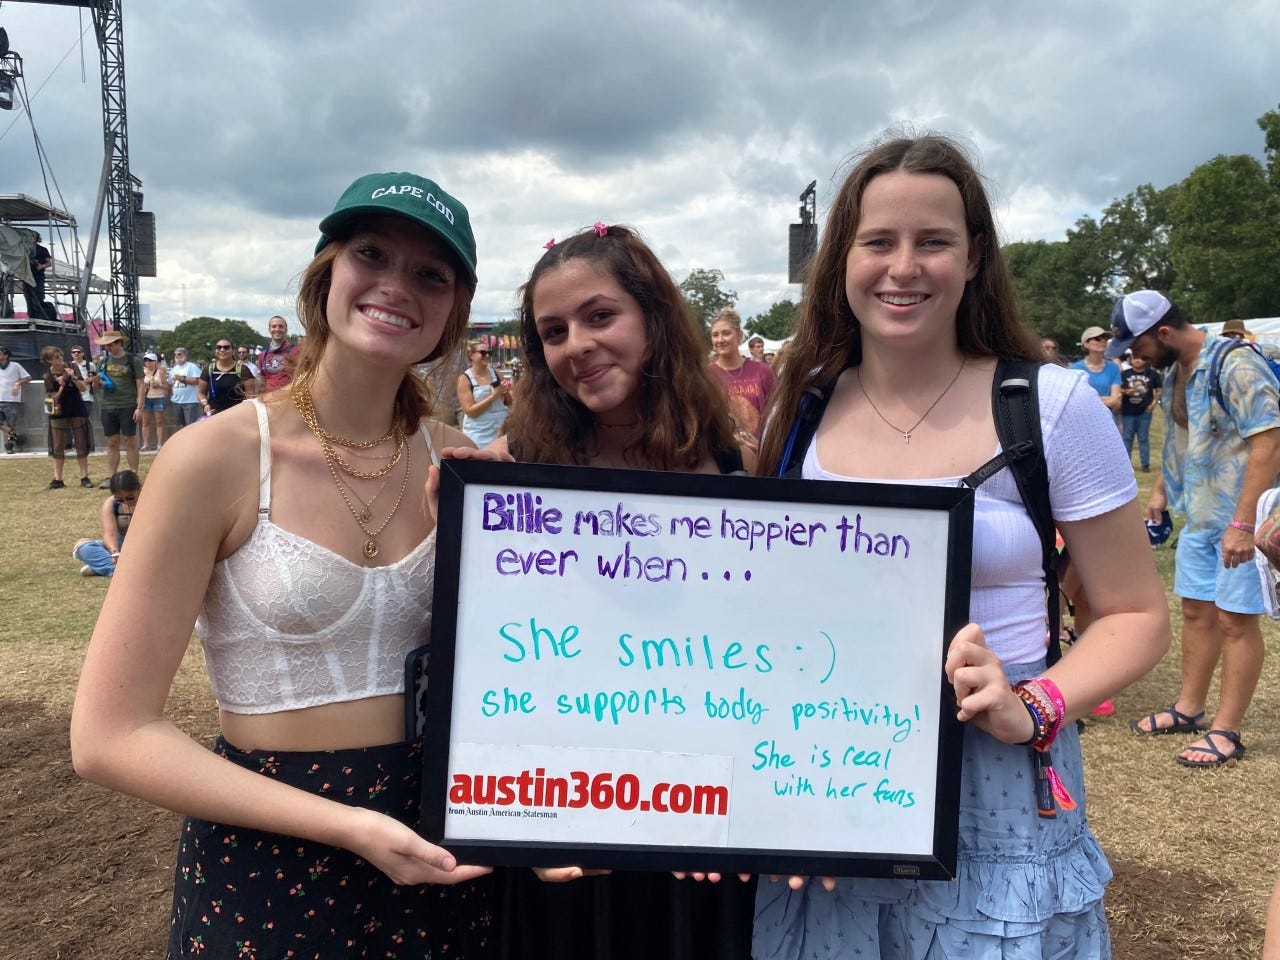 Natasha Chamittoff, 16, left, Sabina Berkley, 17, middle, and Grace Henson, 16, waiting for the Billie Eilish show on Saturday Oct. 2, 2021. All three are from Austin, Texas.